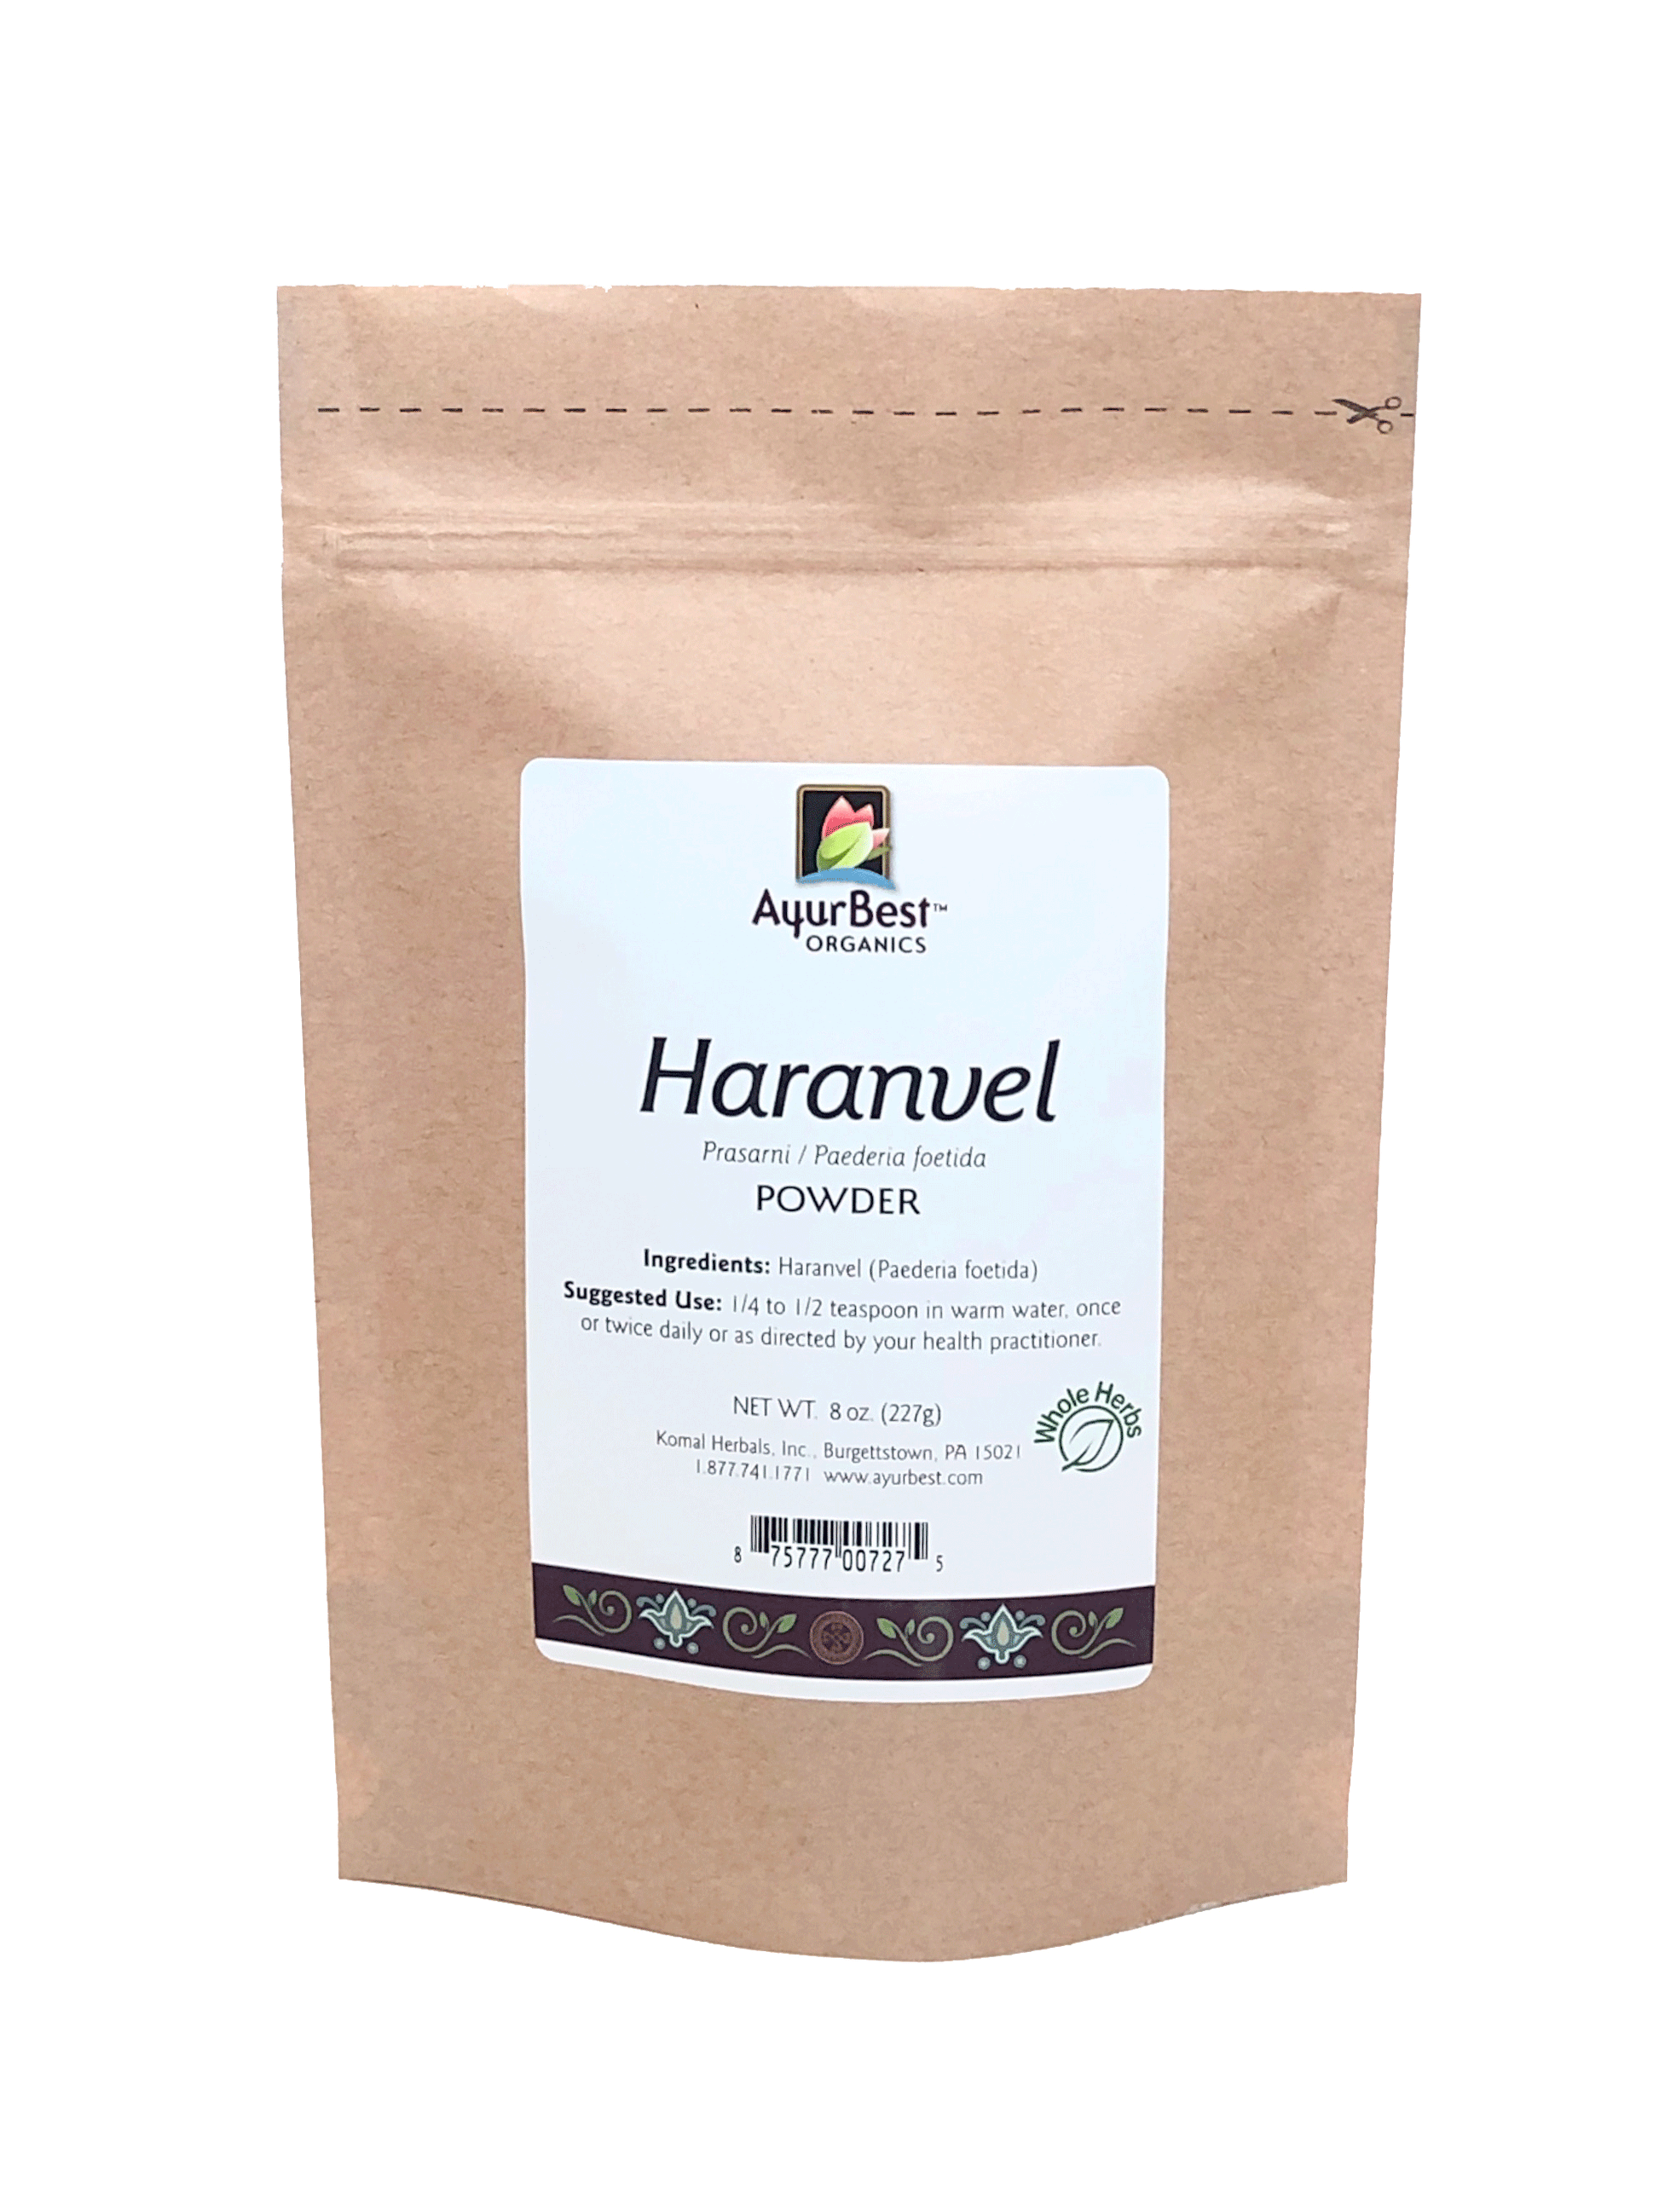 Organic Haranvel Powder available in 8oz size!